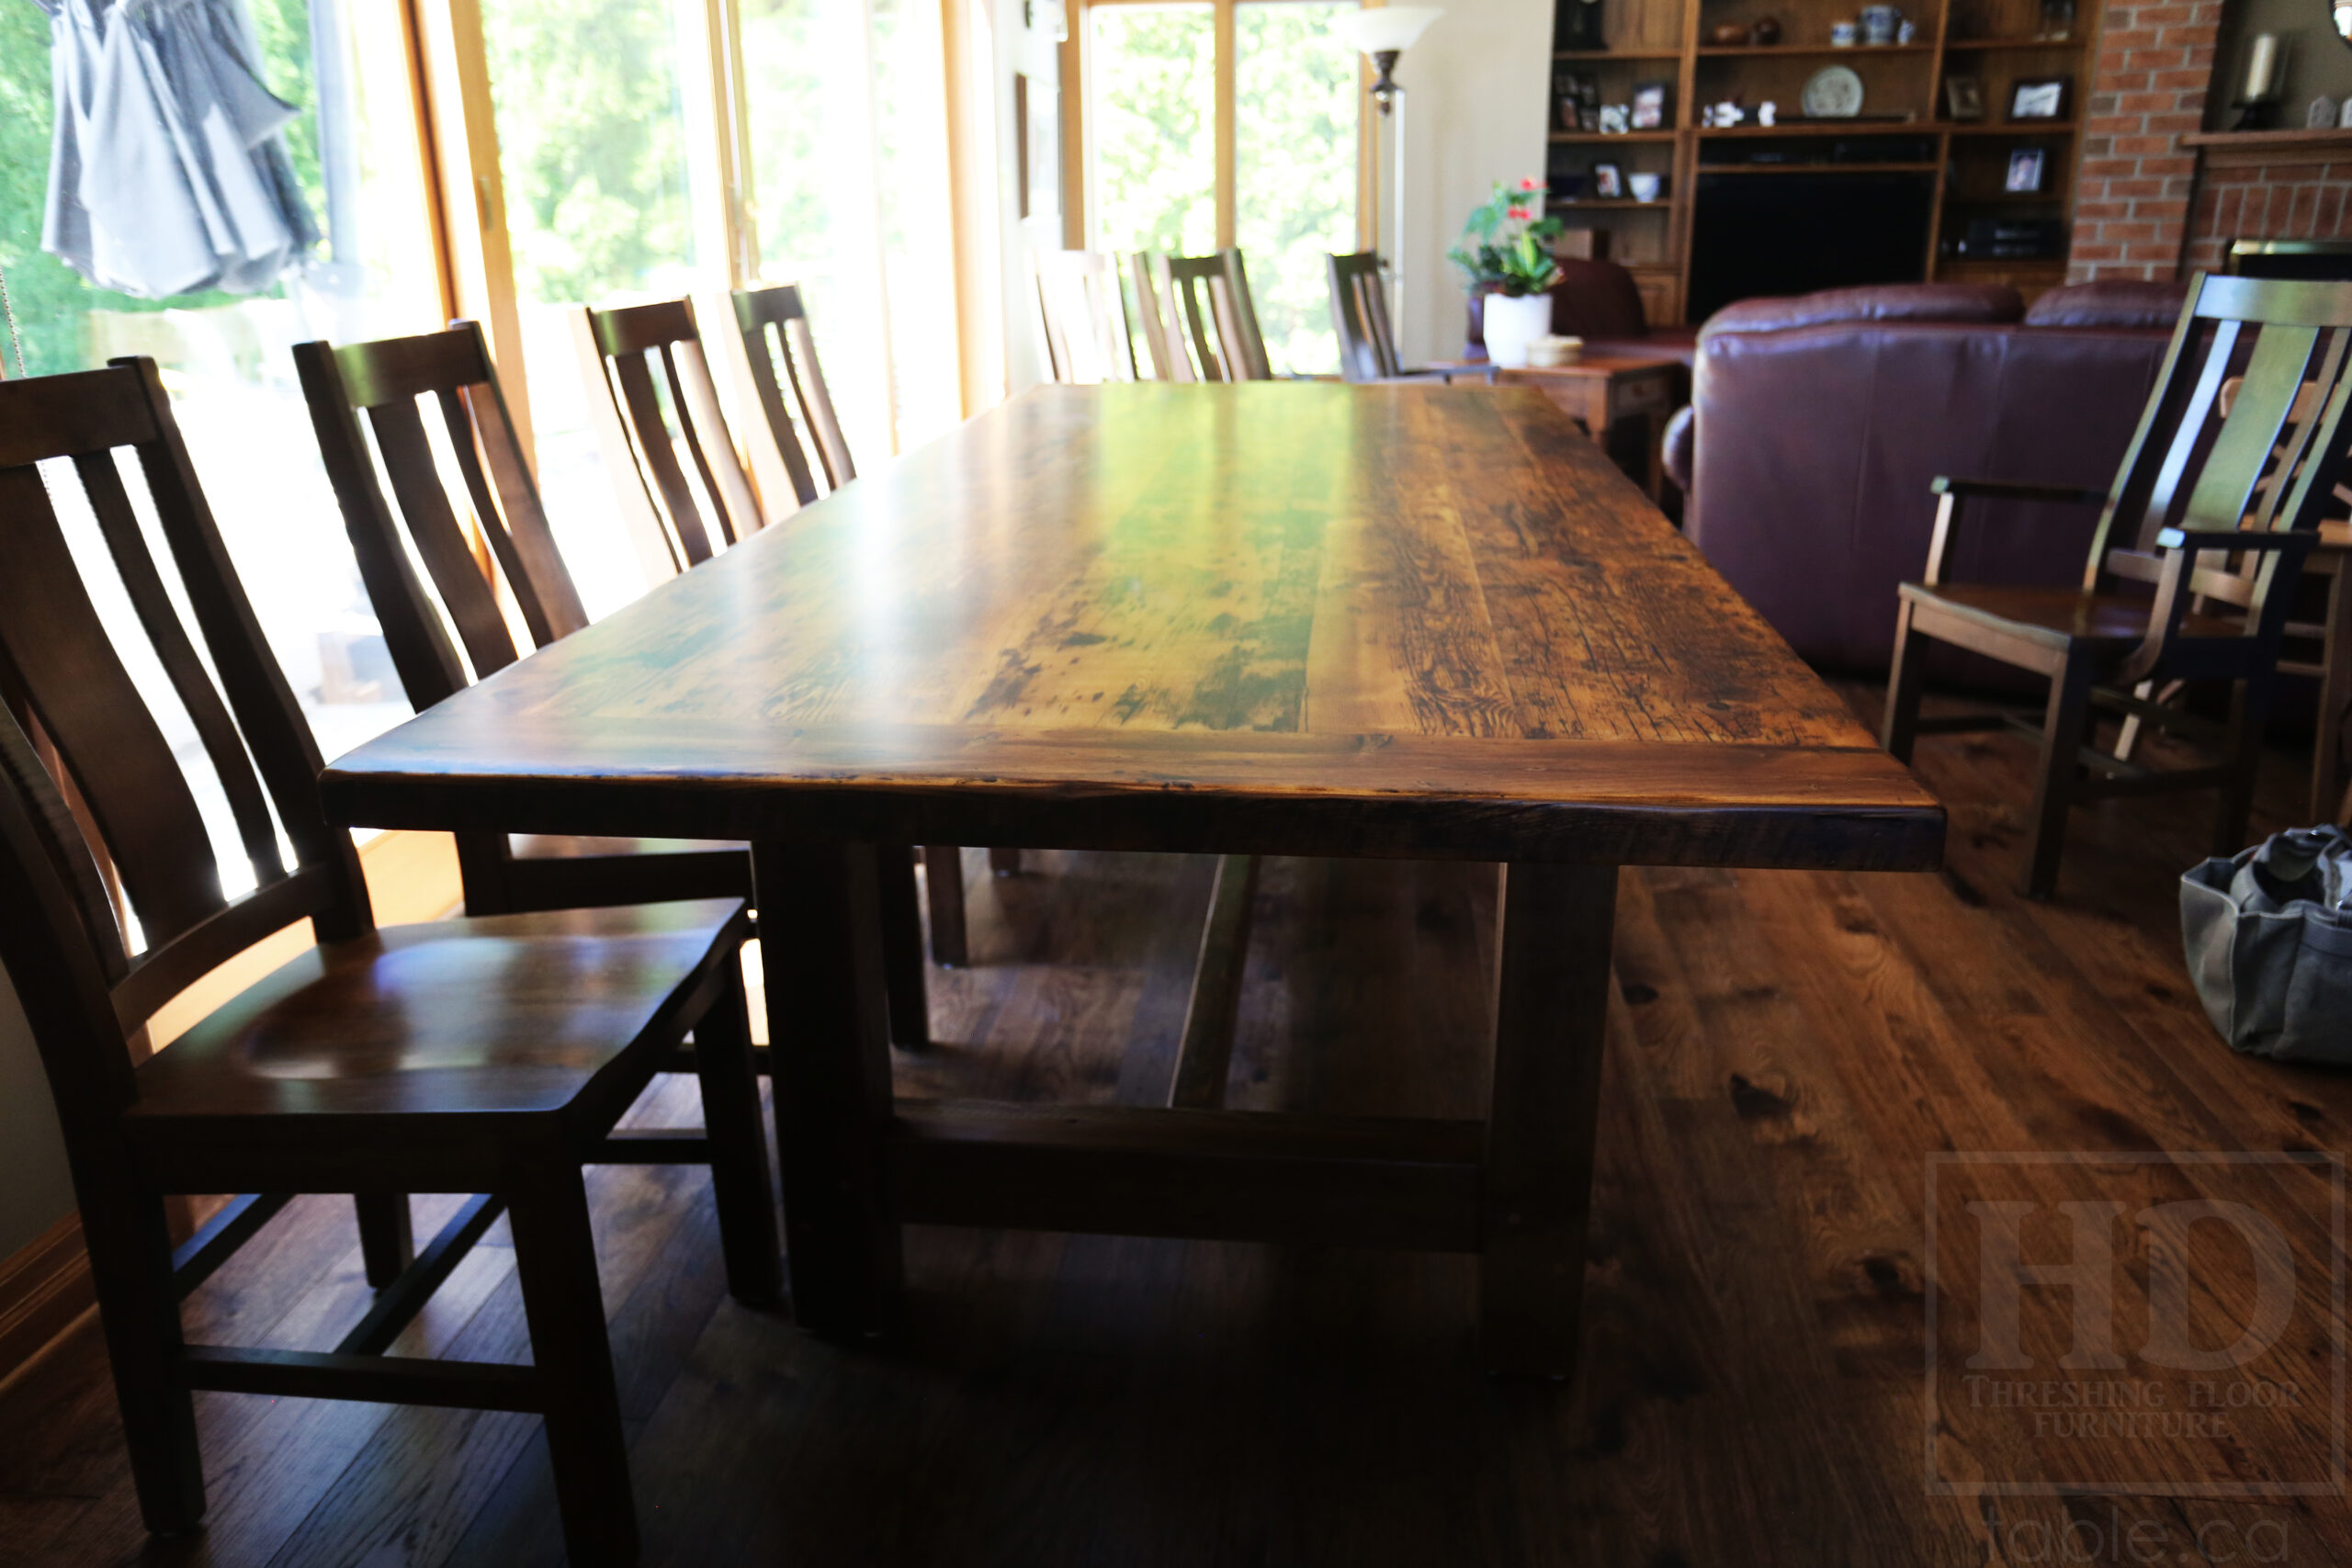 Project Summary: 9â€™ Reclaimed Ontario Barnwood Frame Table we made for a St. Catherines, Ontario Home â€“ 42â€ wide - Old Growth Hemlock Threshing Floor Construction - Original edges & distressing maintained â€“ Bread Edge Boards - Premium epoxy + matte polyurethane finish â€“ 10 Sorority Chairs / Wormy Maple / Stained Dominant Tone of Table / Polyurethane Clearcoat Finish - www.table.ca